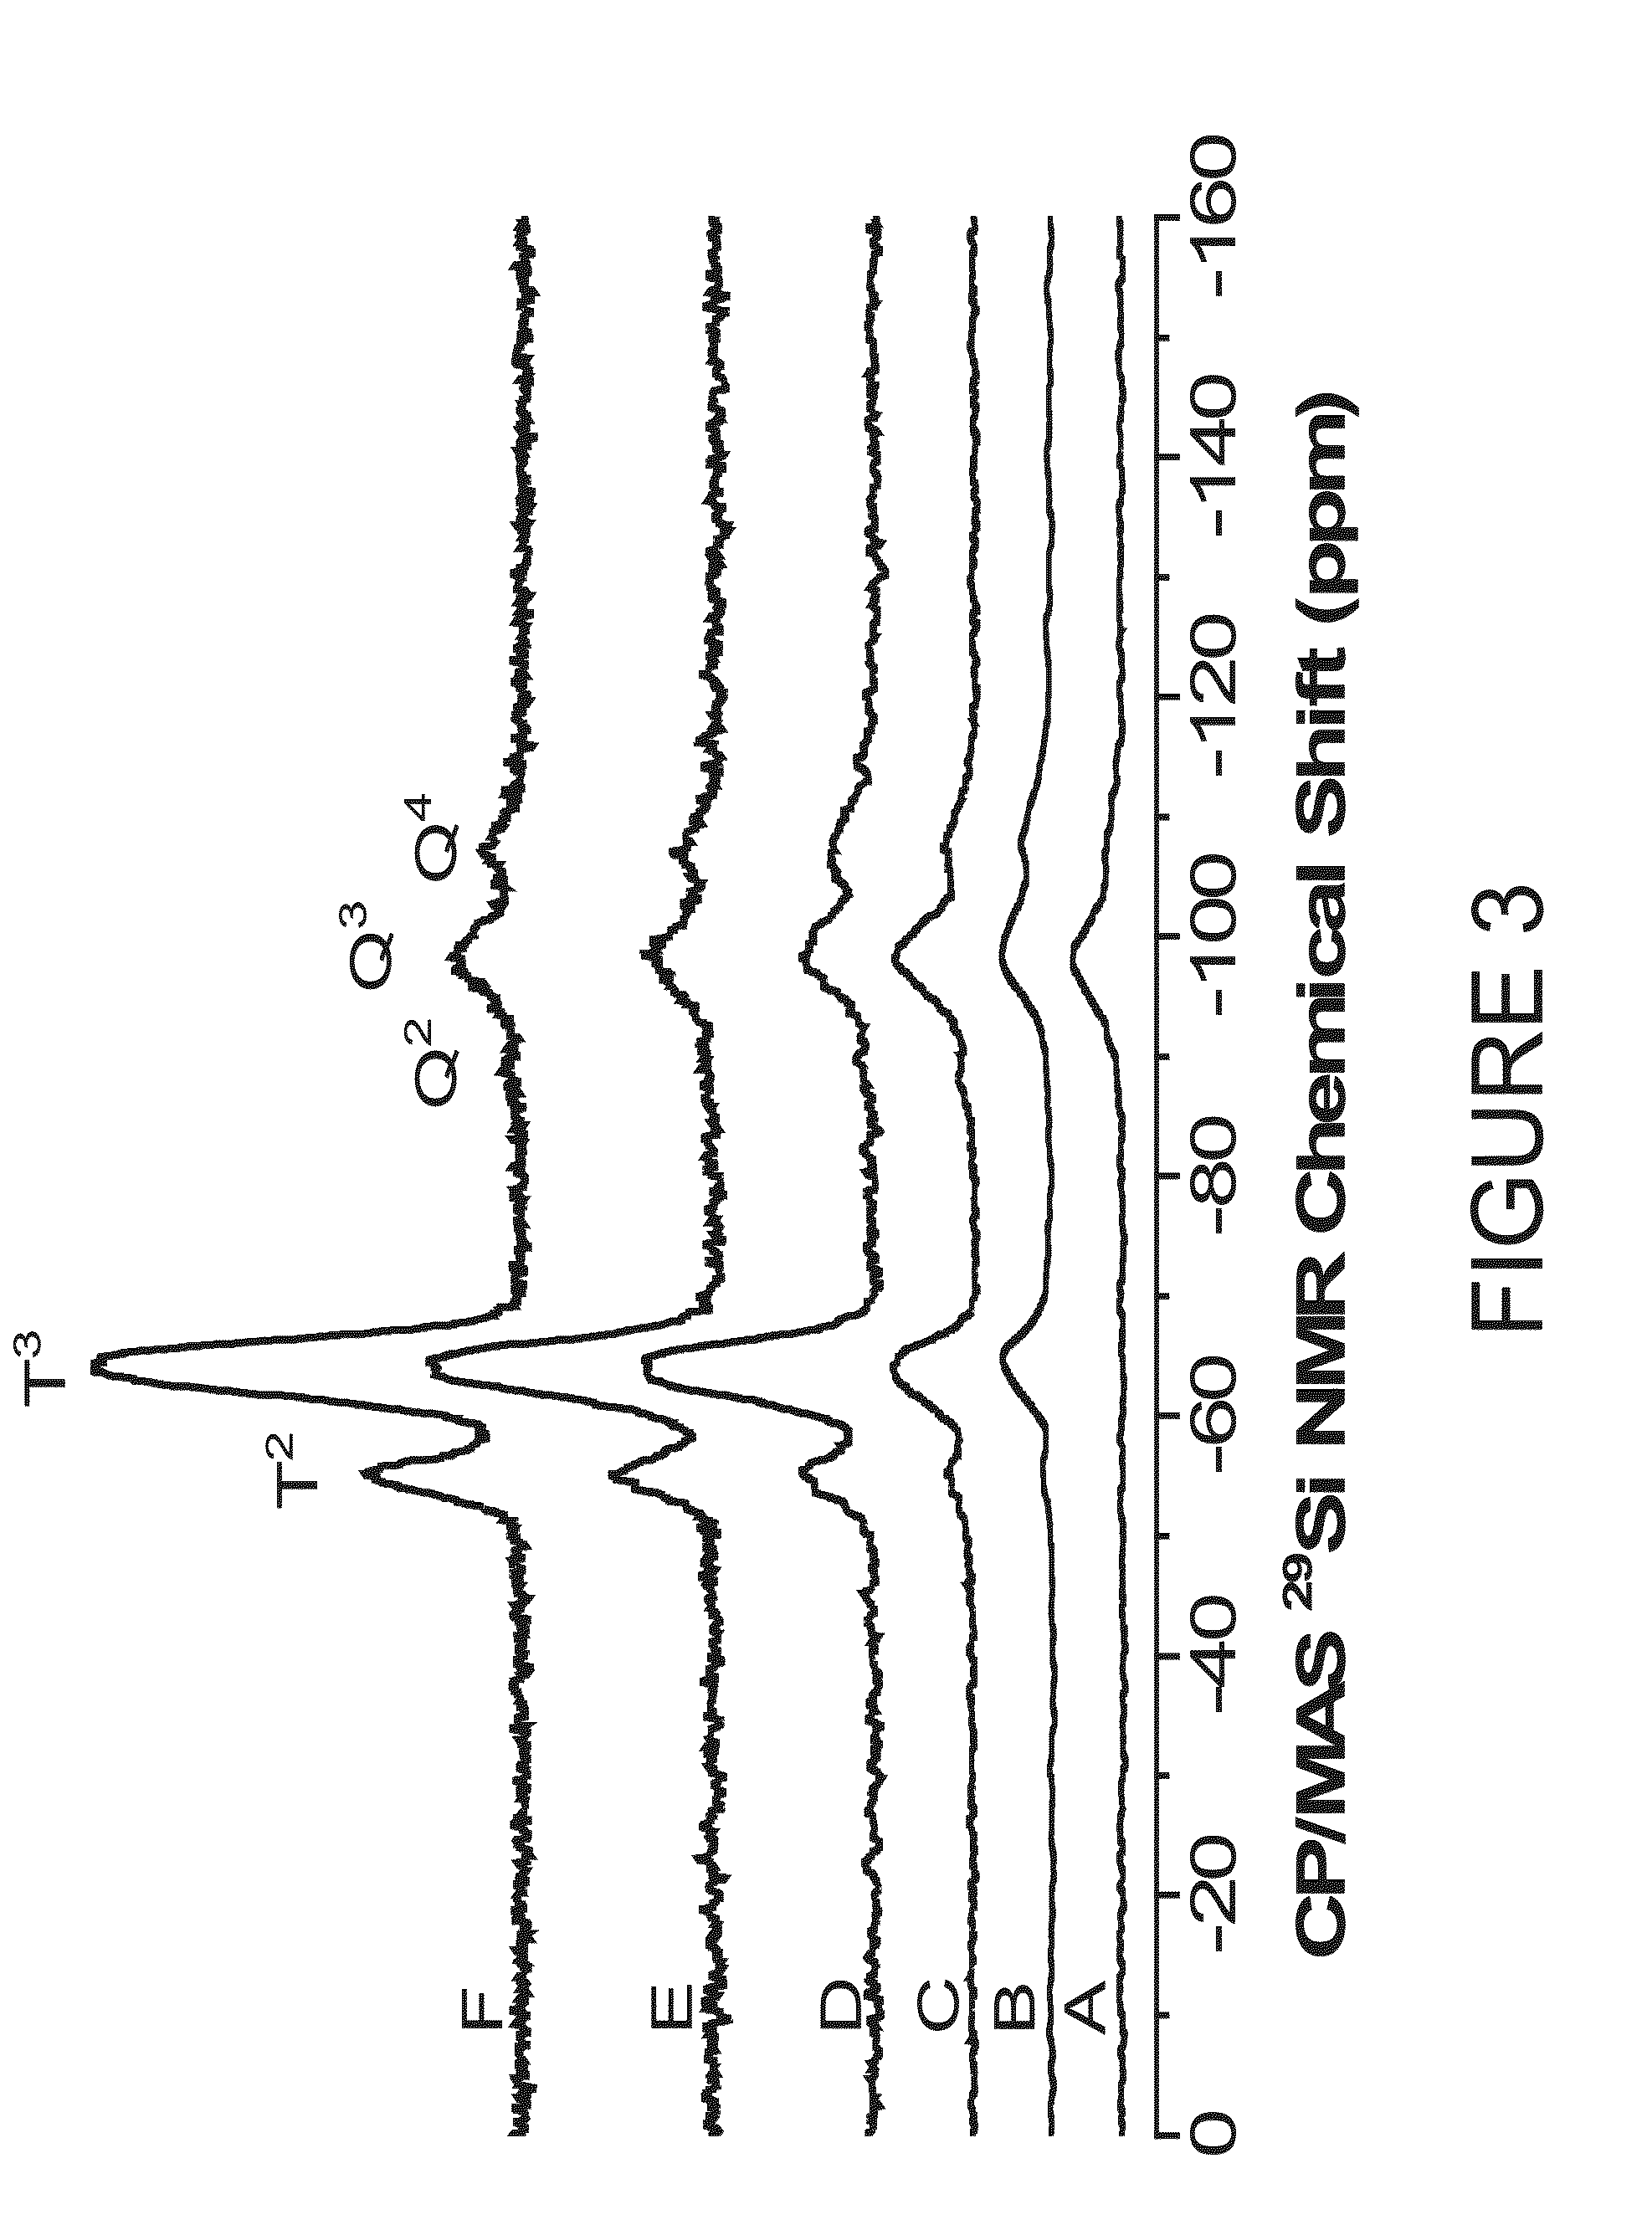 Nitric oxide-releasing s-nitrosothiol-modified silica particles and methods of making the same